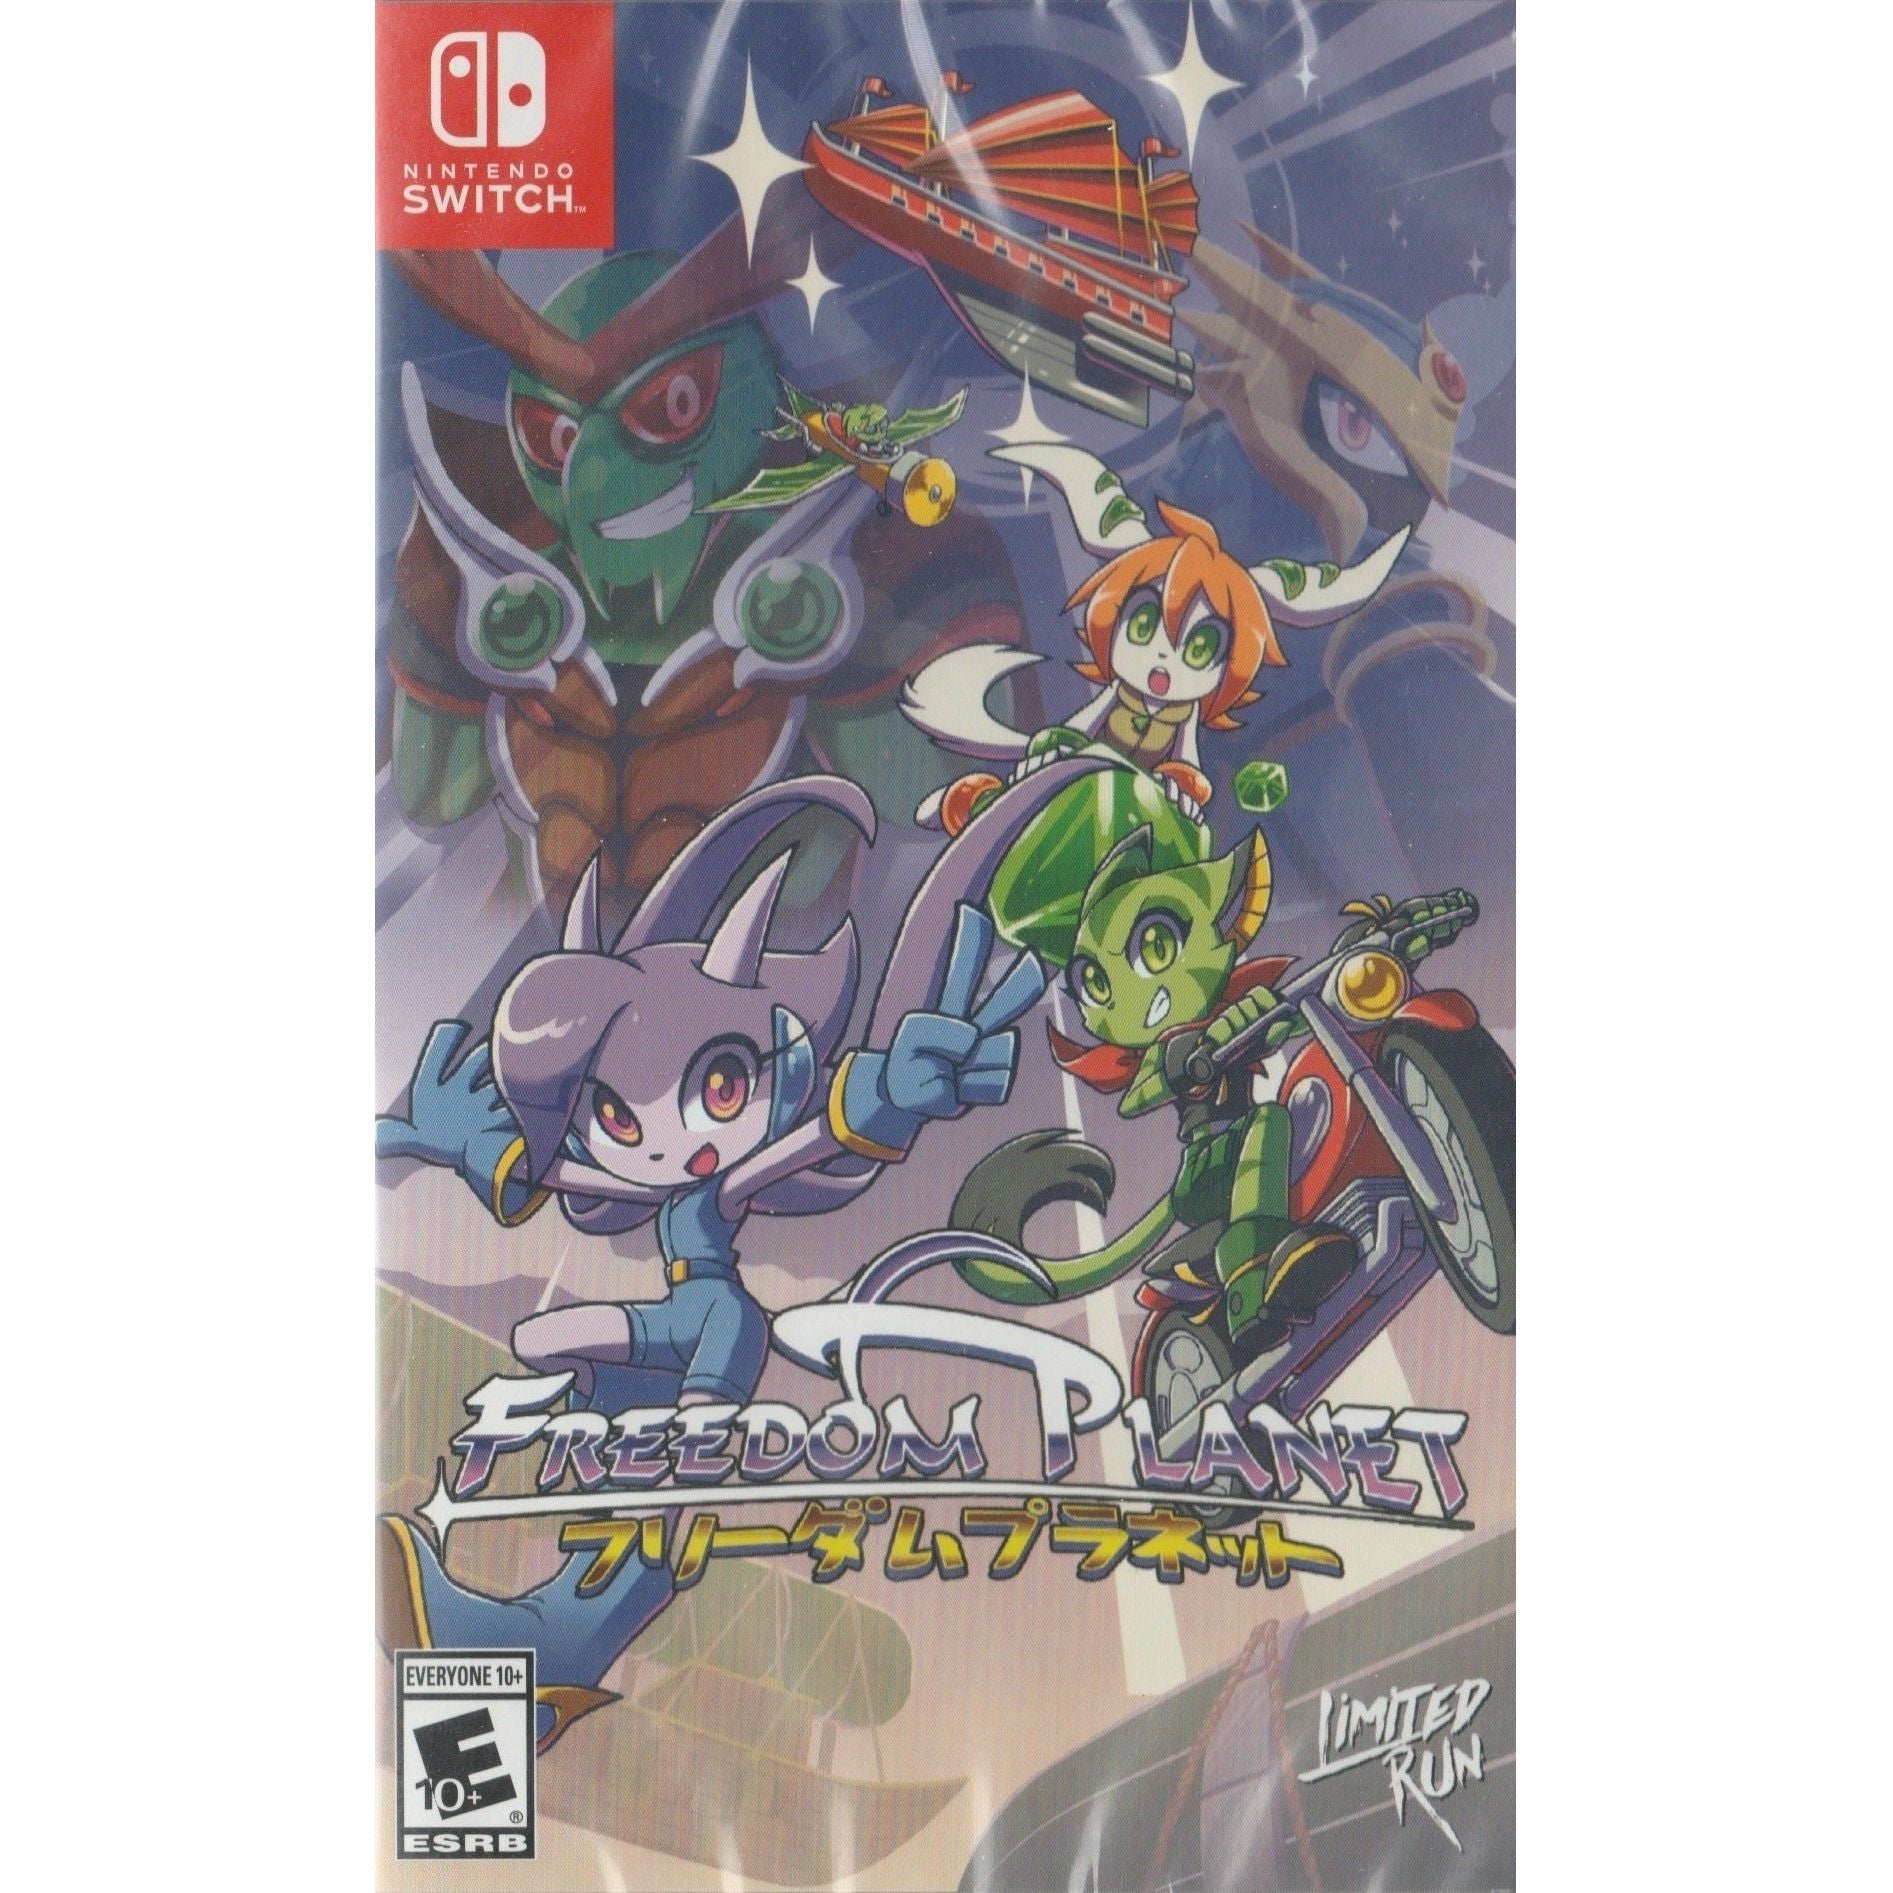 Switch - Freedom Planet (Limited Run Game #035) (In Case)